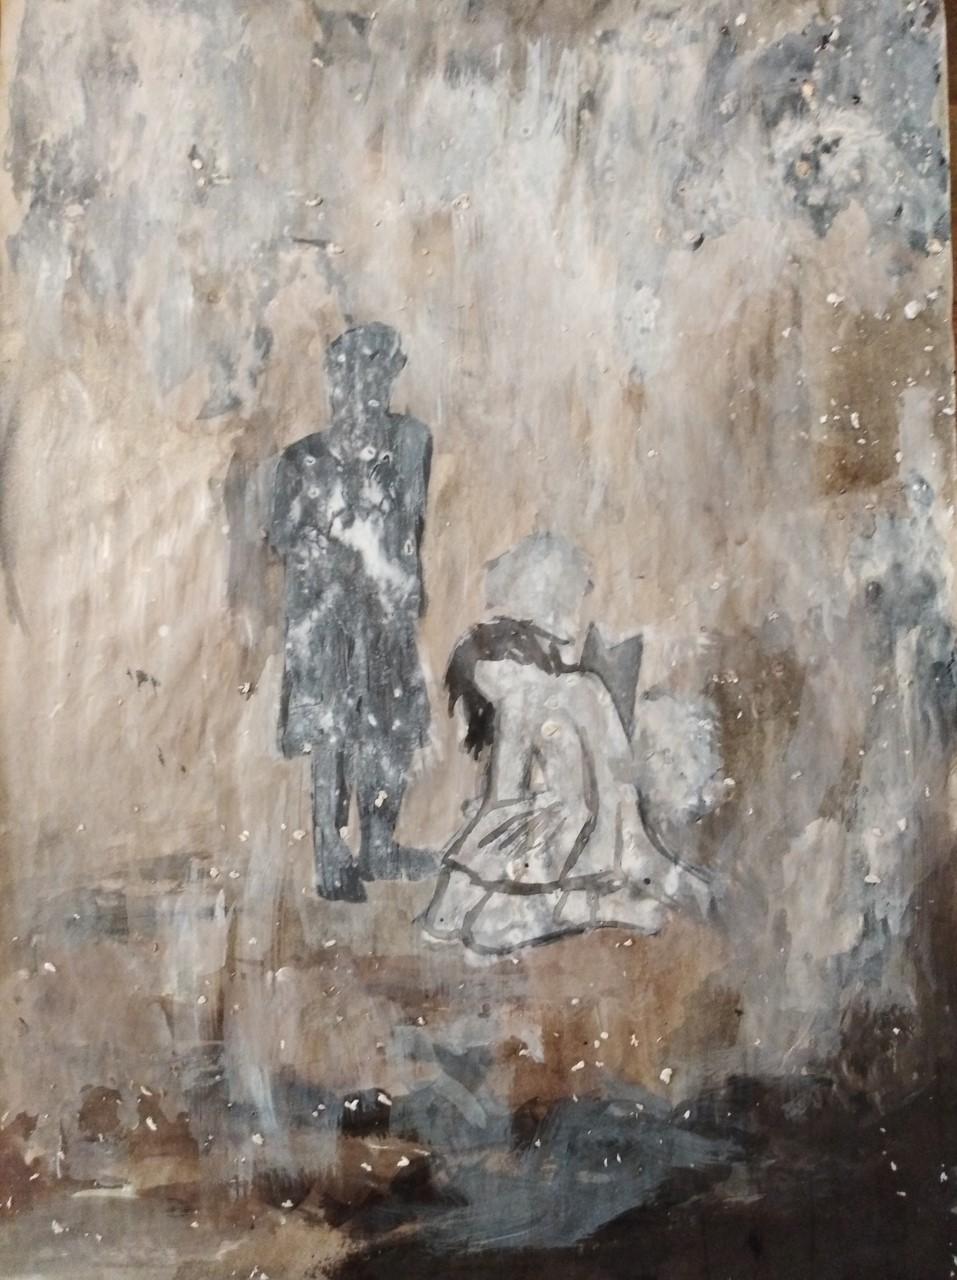 Cenizas y diamantes XVI, 2020 by Cecilia Méndez Casariego
From the series "Cenizas y diamantes"
Acrylic paint on sulphite paper
Image size:  45 H cm. x 33 W cm. 
Unframed

The artist's works take the human body to address universal problems linked